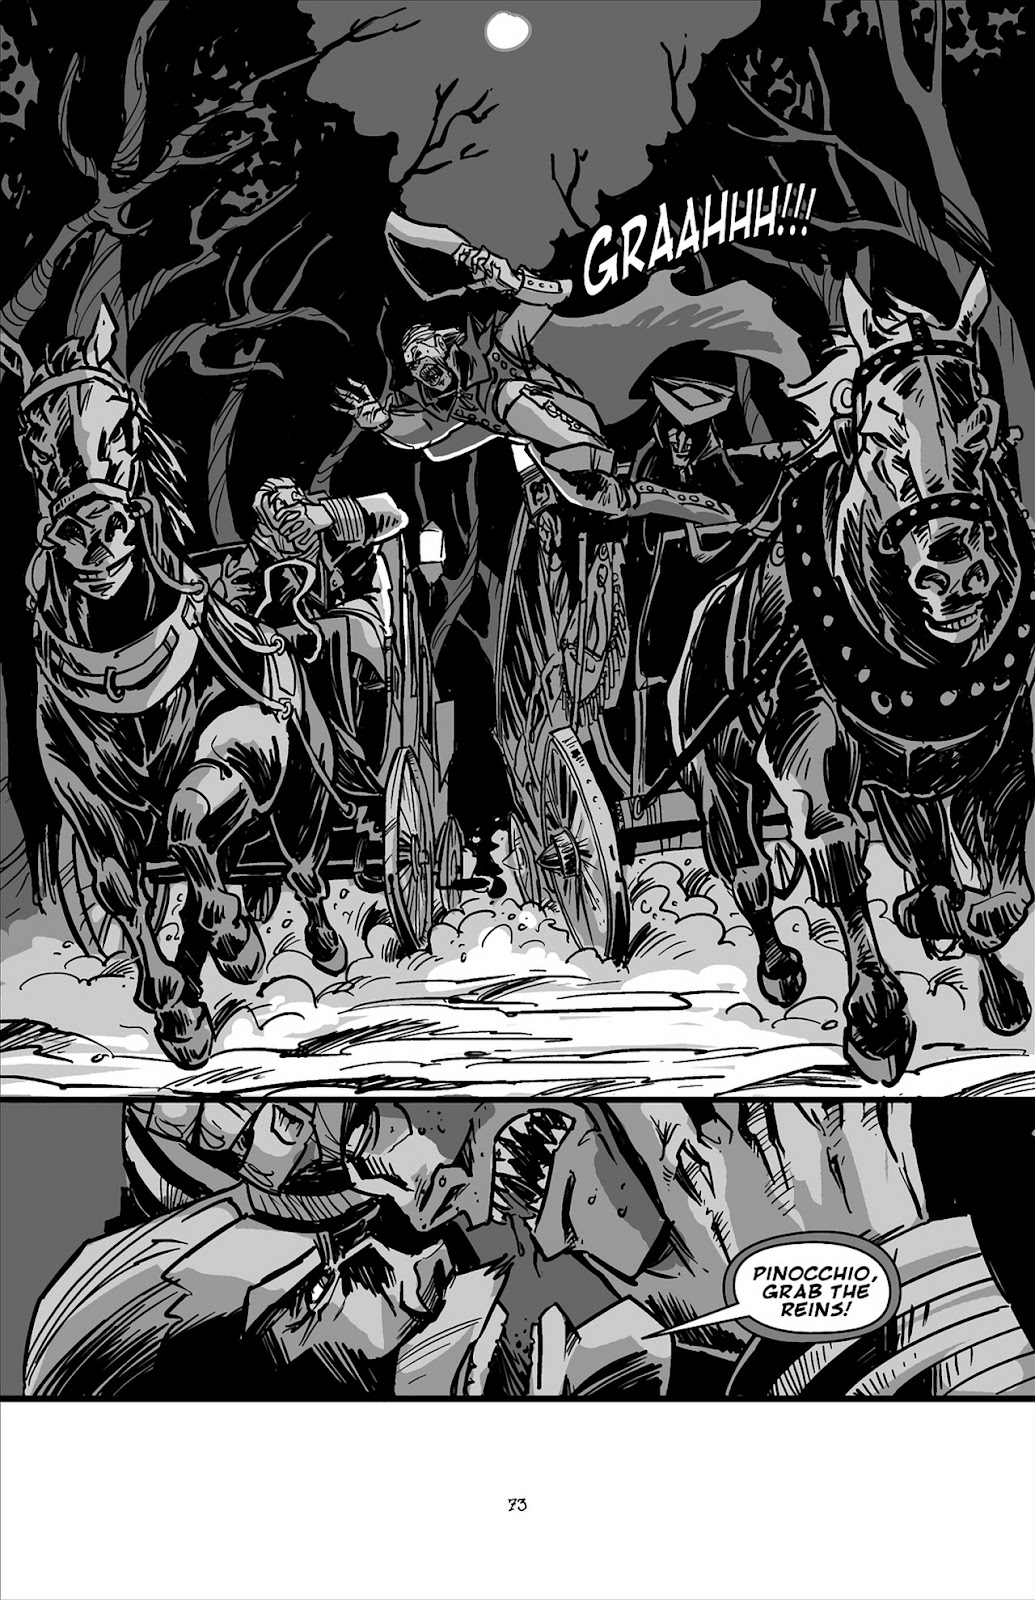 Pinocchio: Vampire Slayer - Of Wood and Blood issue 3 - Page 24